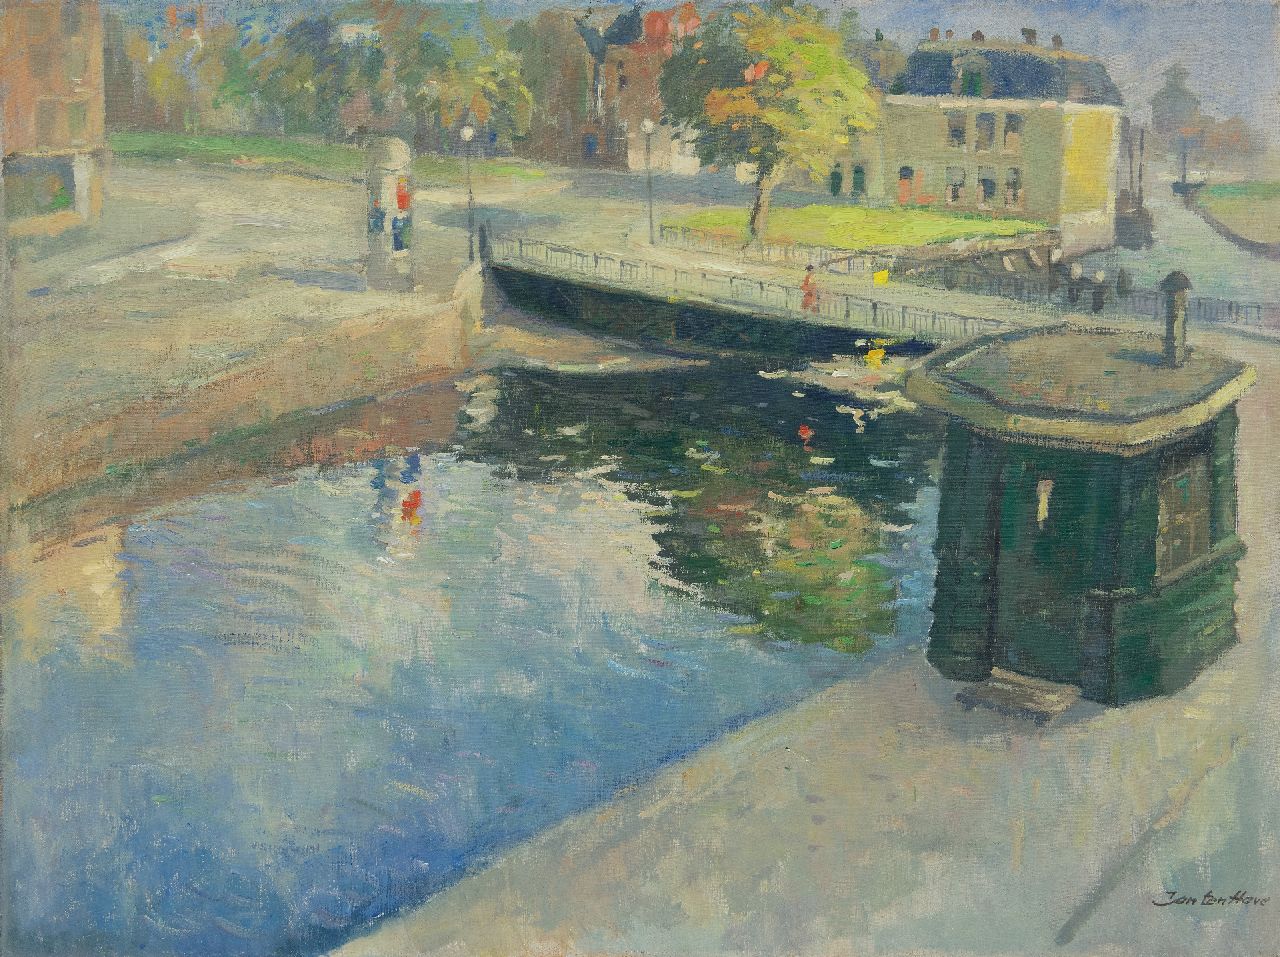 Have J. ten | Jan ten Have, The Steentilbridge, Groningen, oil on canvas 60.0 x 80.0 cm, signed l.r. and painted ca. 1925-1930